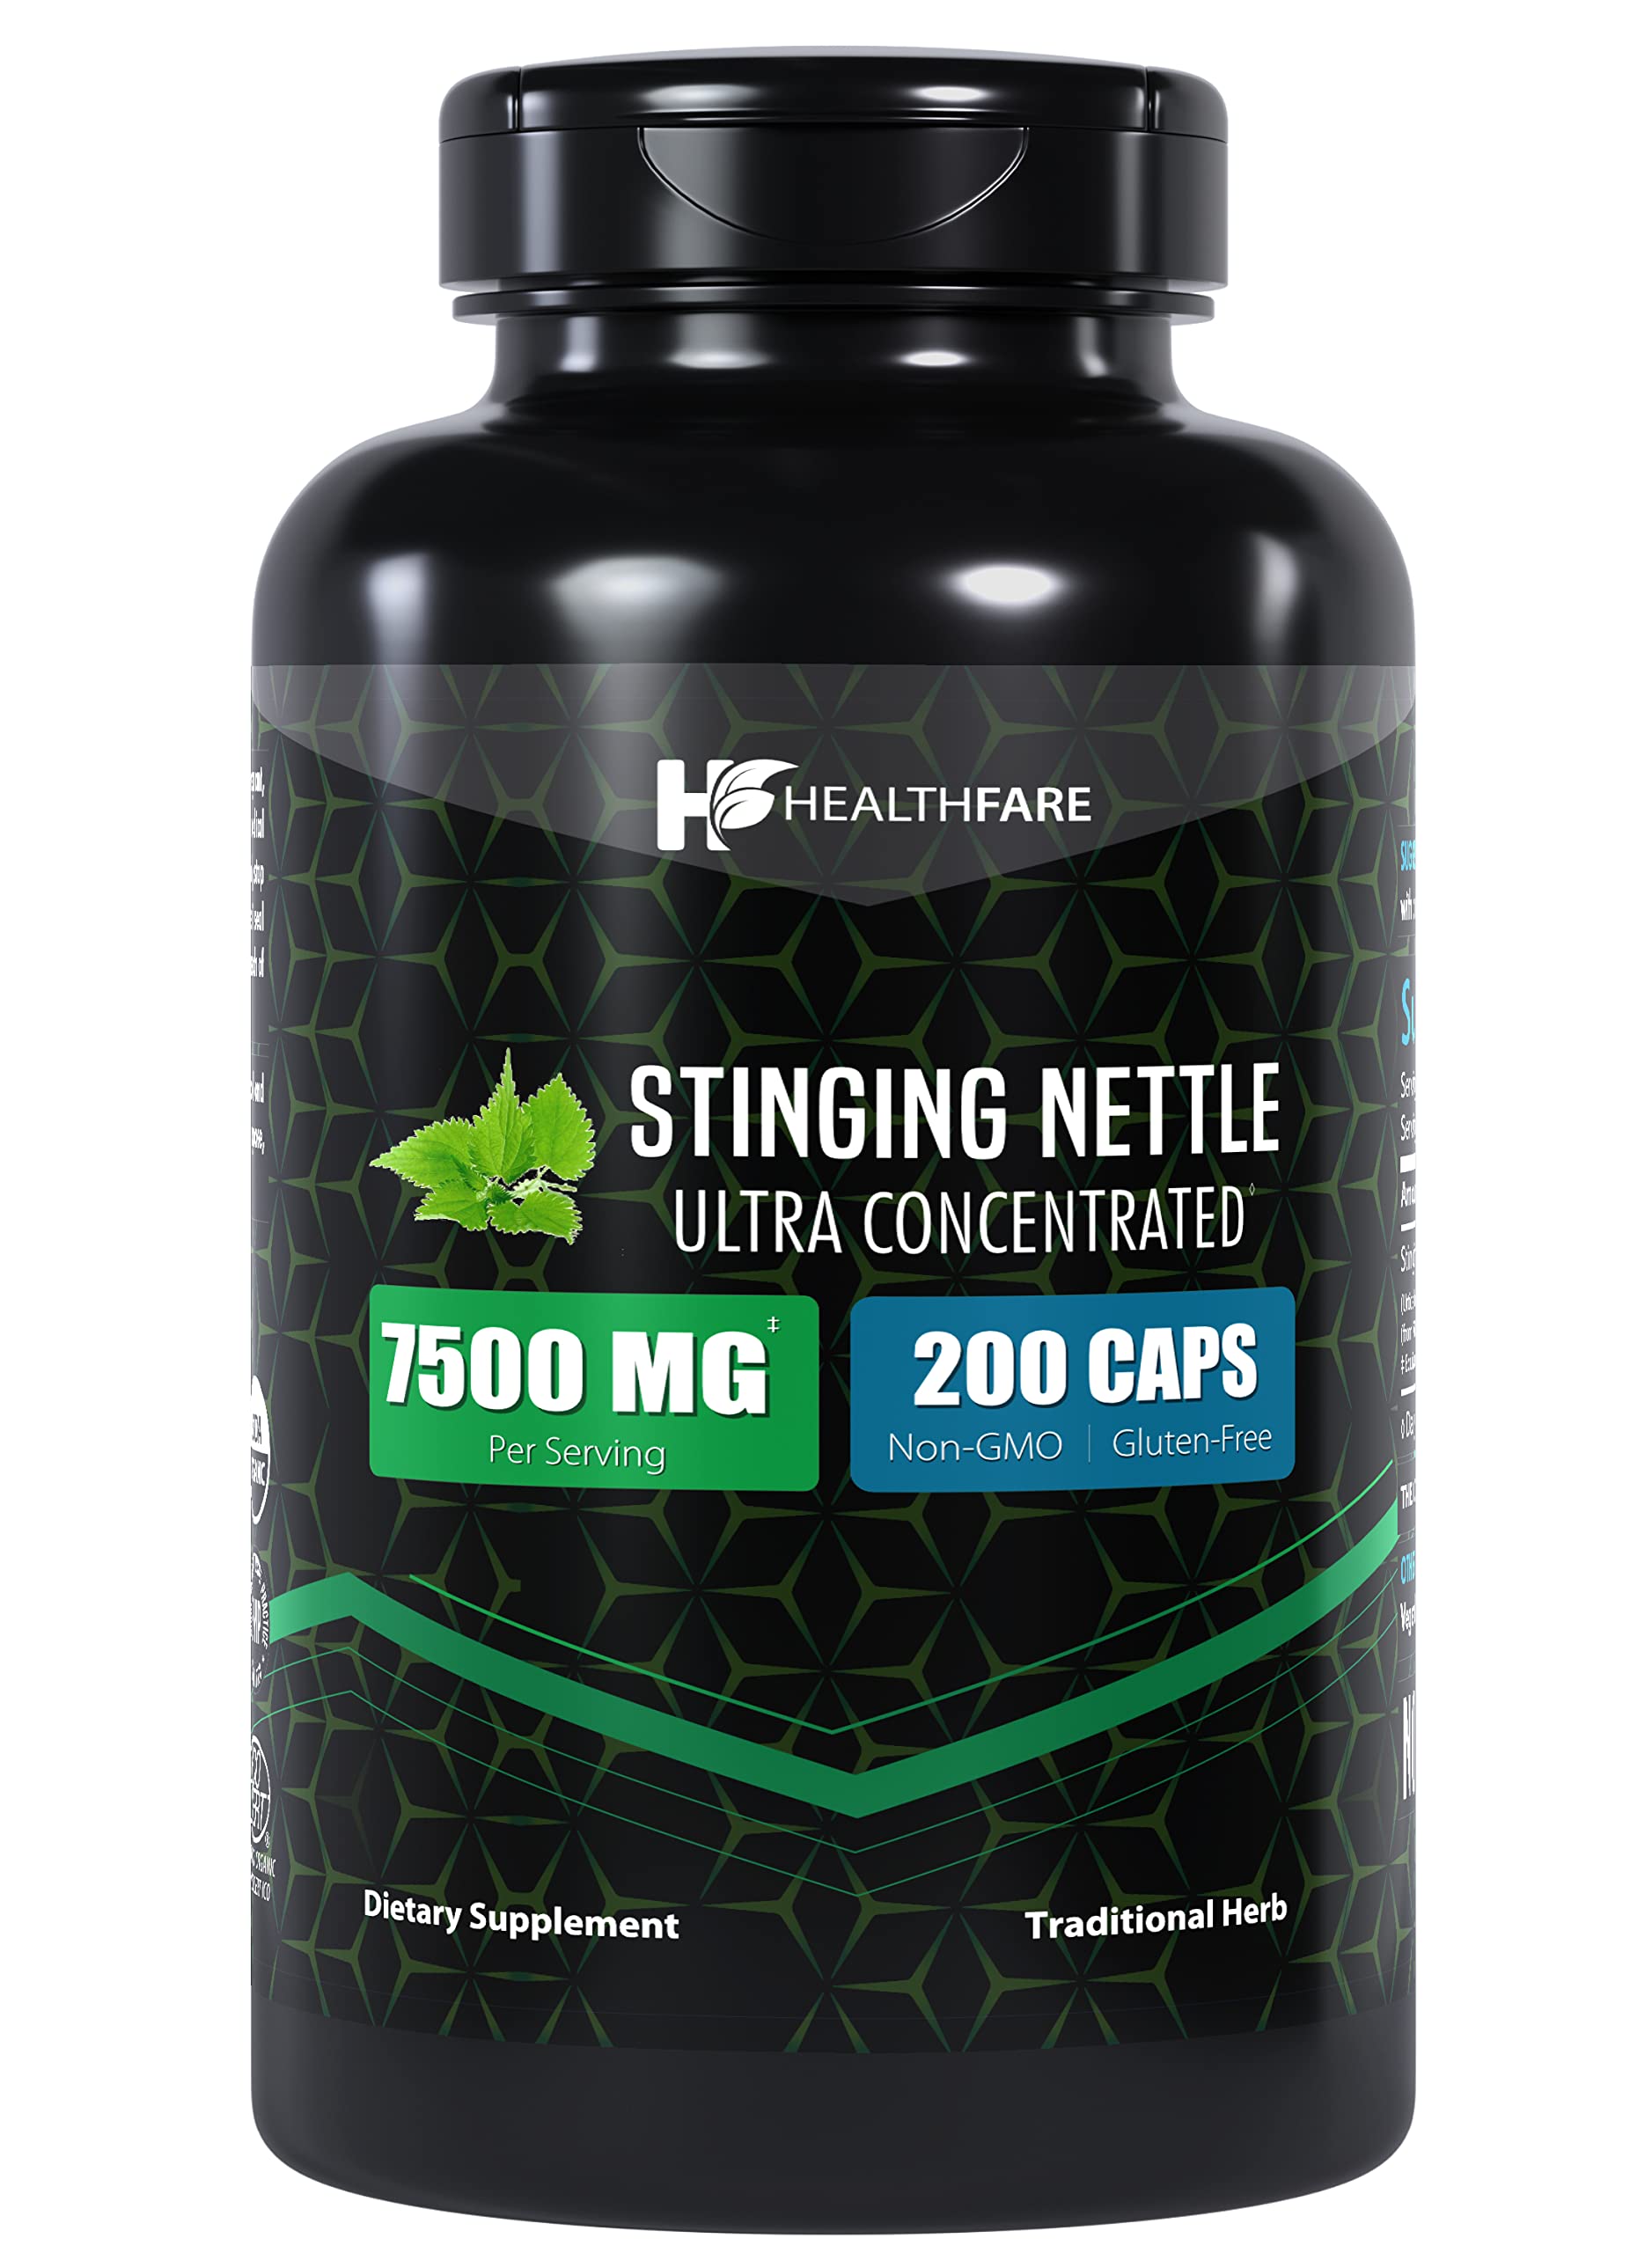 Healthfare Stinging Nettle Leaf Extract 7500mg 200 Caps  Urtica Dioica Supplement